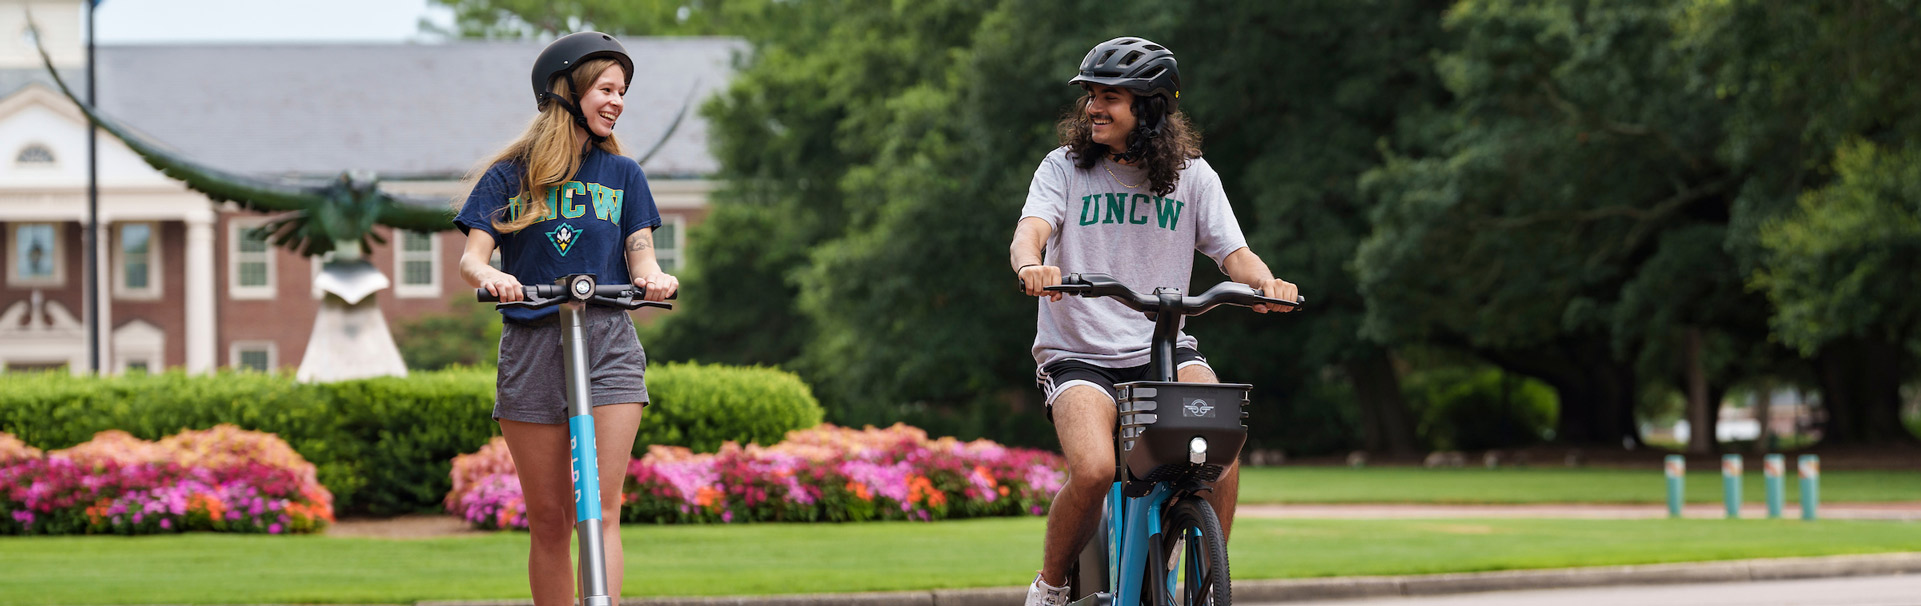 Students riding ebike and escooter